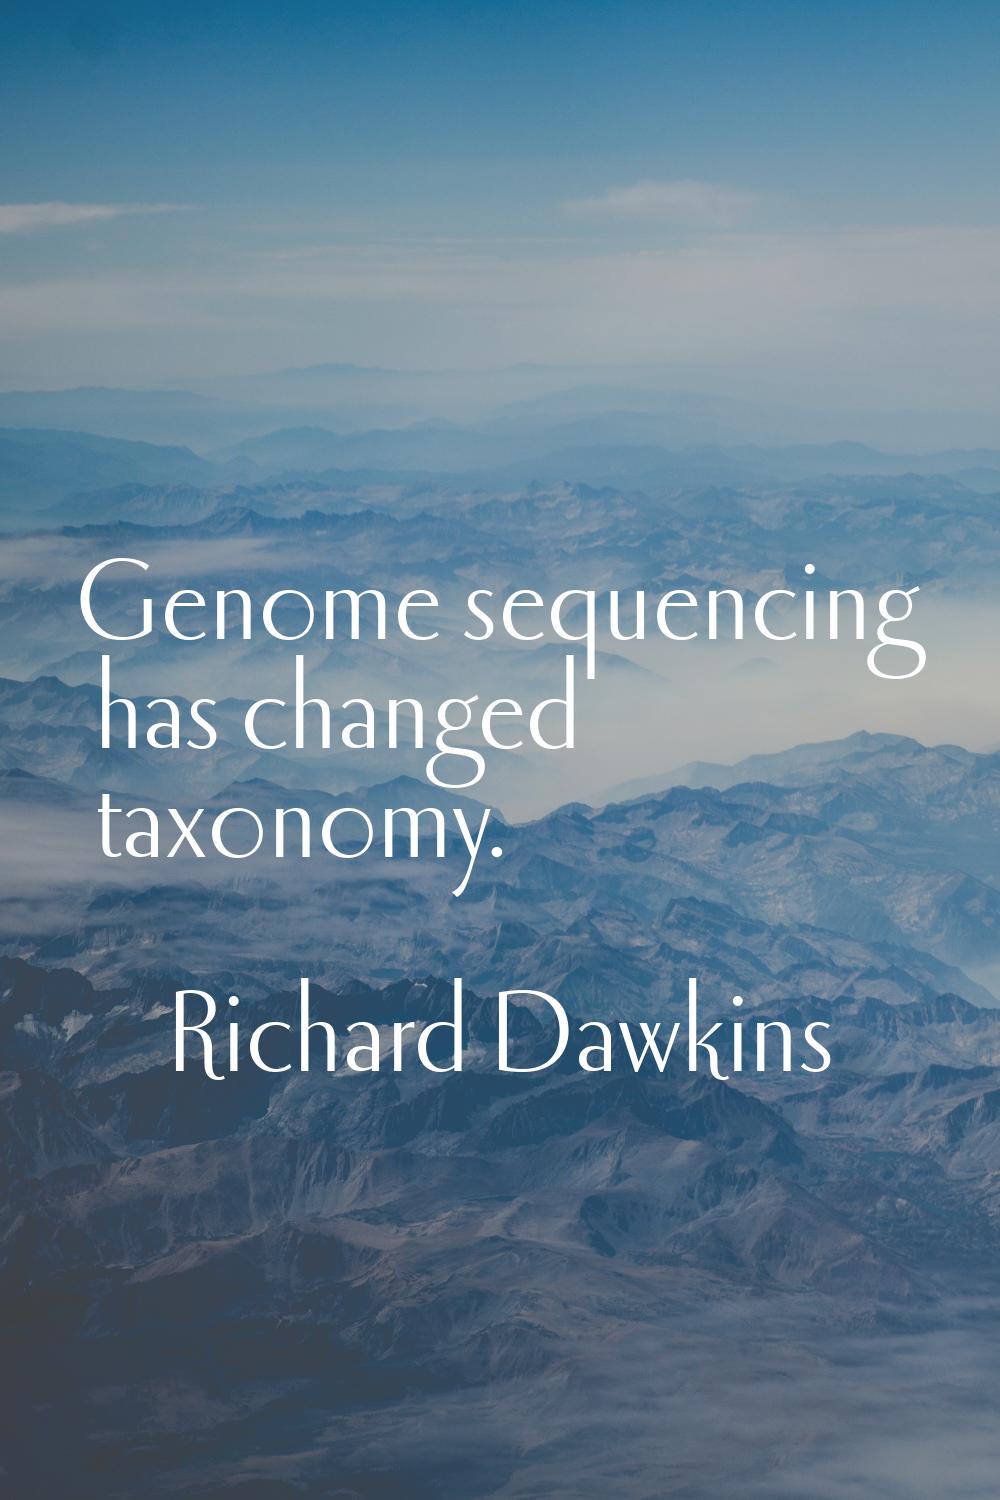 Genome sequencing has changed taxonomy.